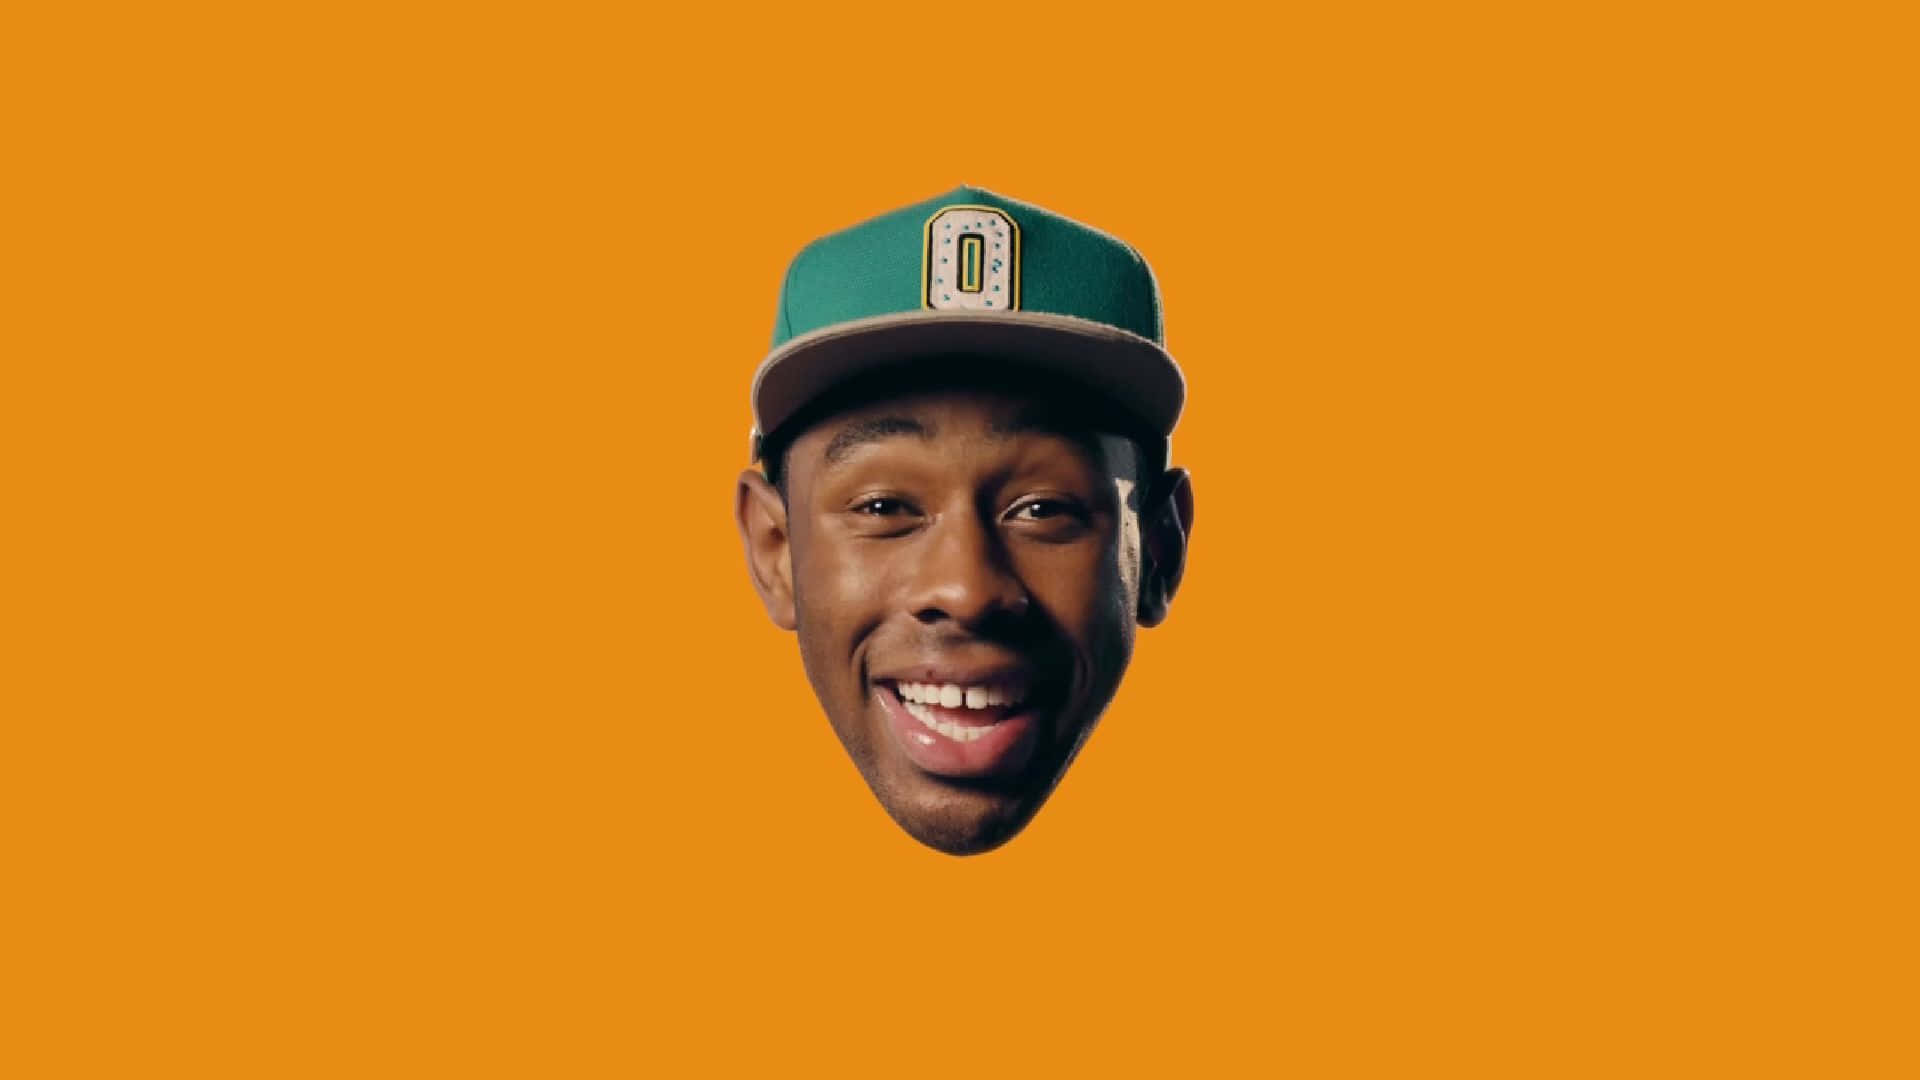 Tyler The Creator stands in the foreground of an orange landscape